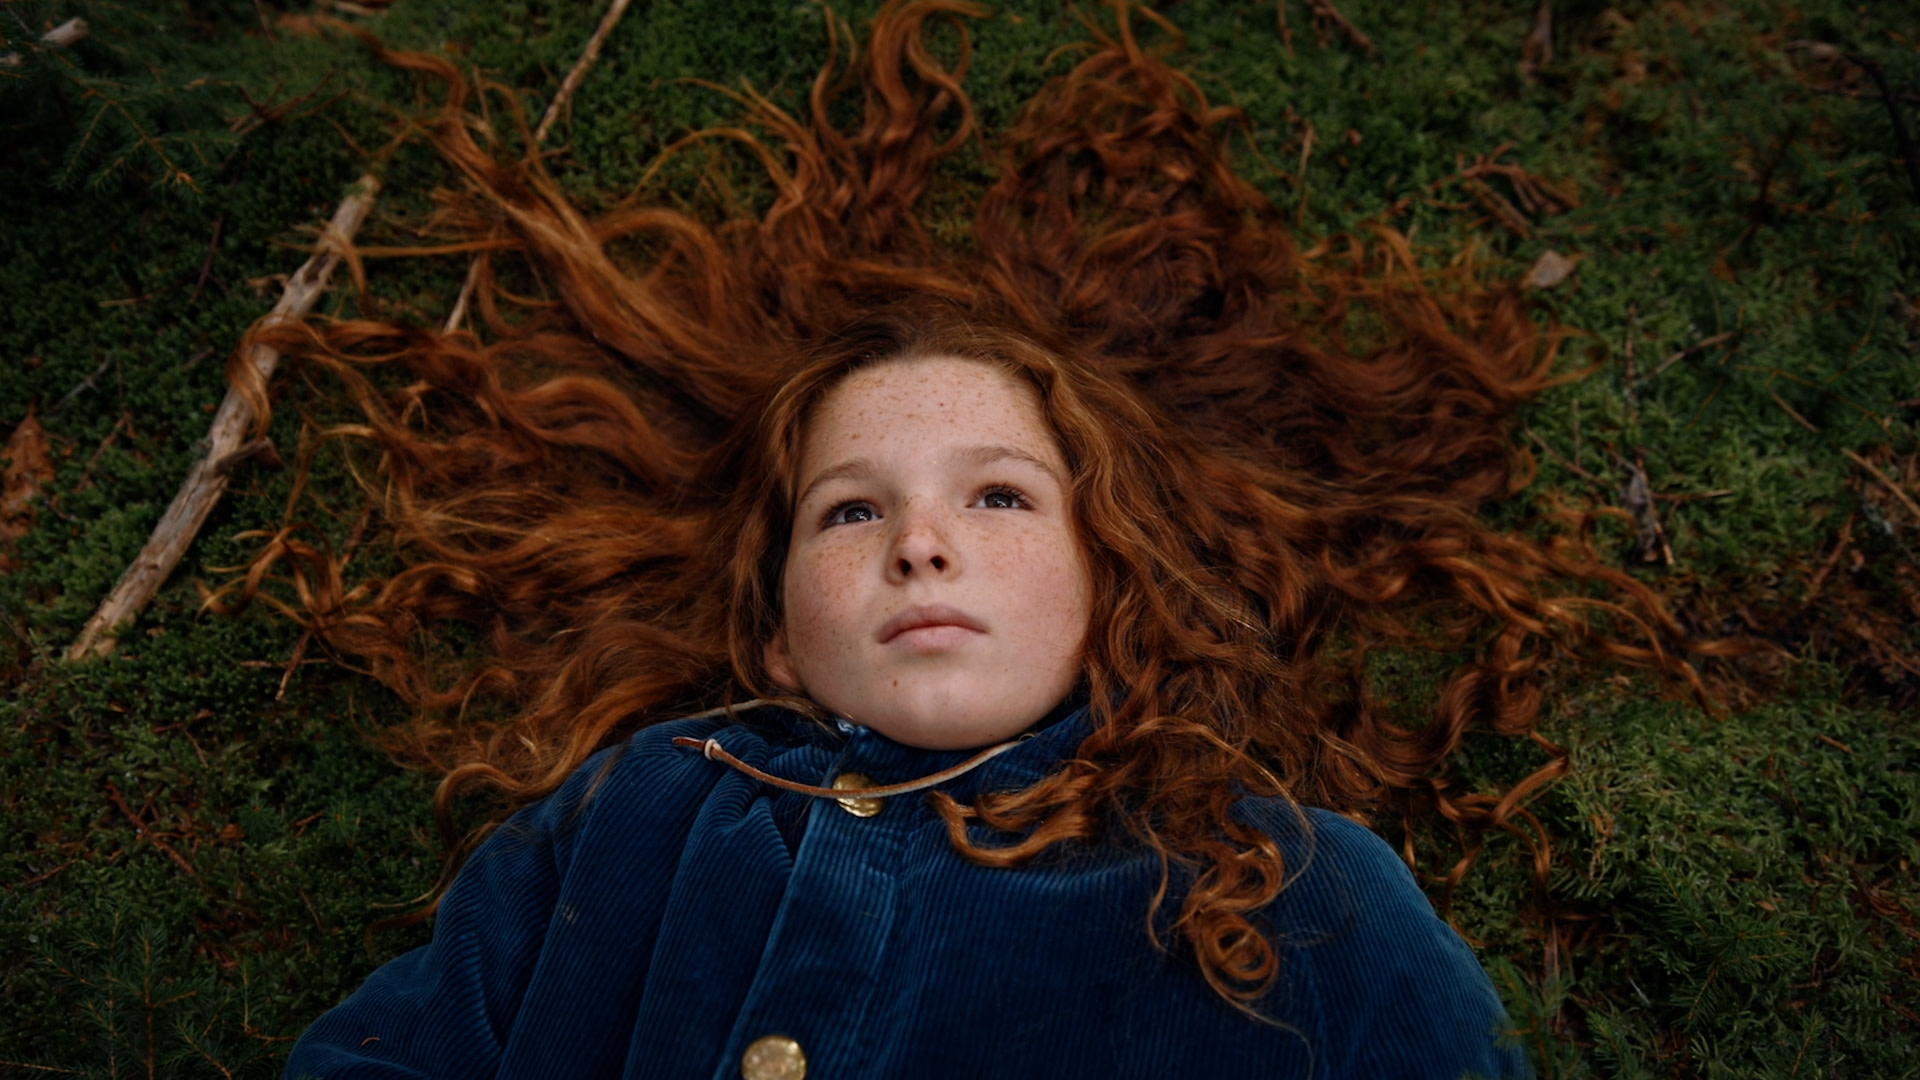 A still from the film King Coal, with a young girl with red hair laying on the grass